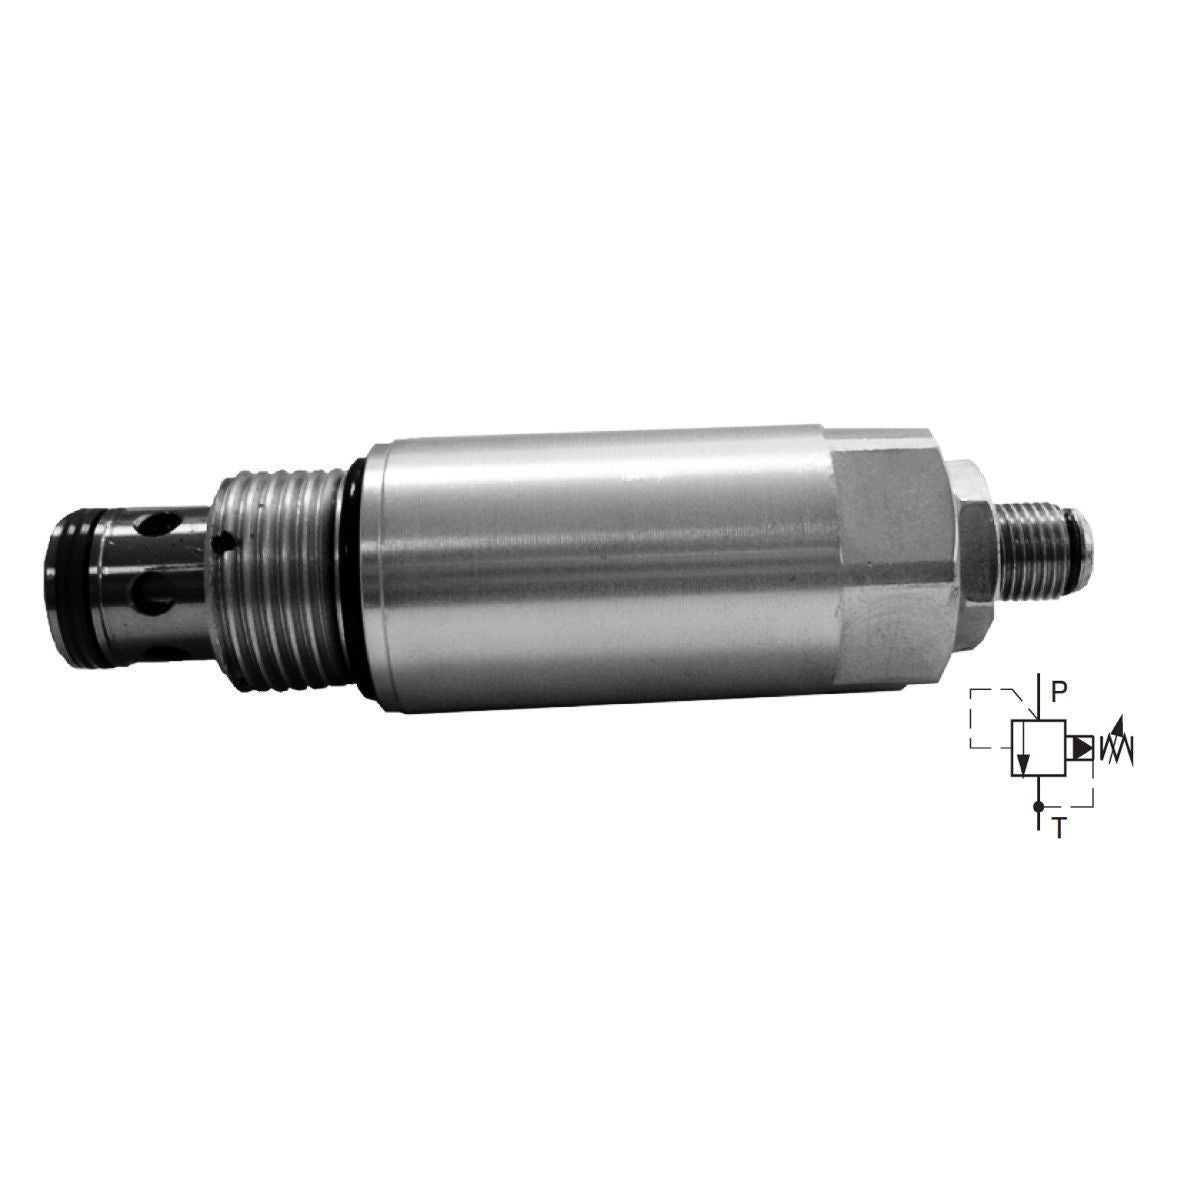 SR4A-B2/H25S-A : Argo Pressure Relief Valve, Spool Type, Pilot-Operated, 26 GPM, 5100psi, Allen Key Screw, Adjustable Up to 3630psi, C-10-2 Cavity